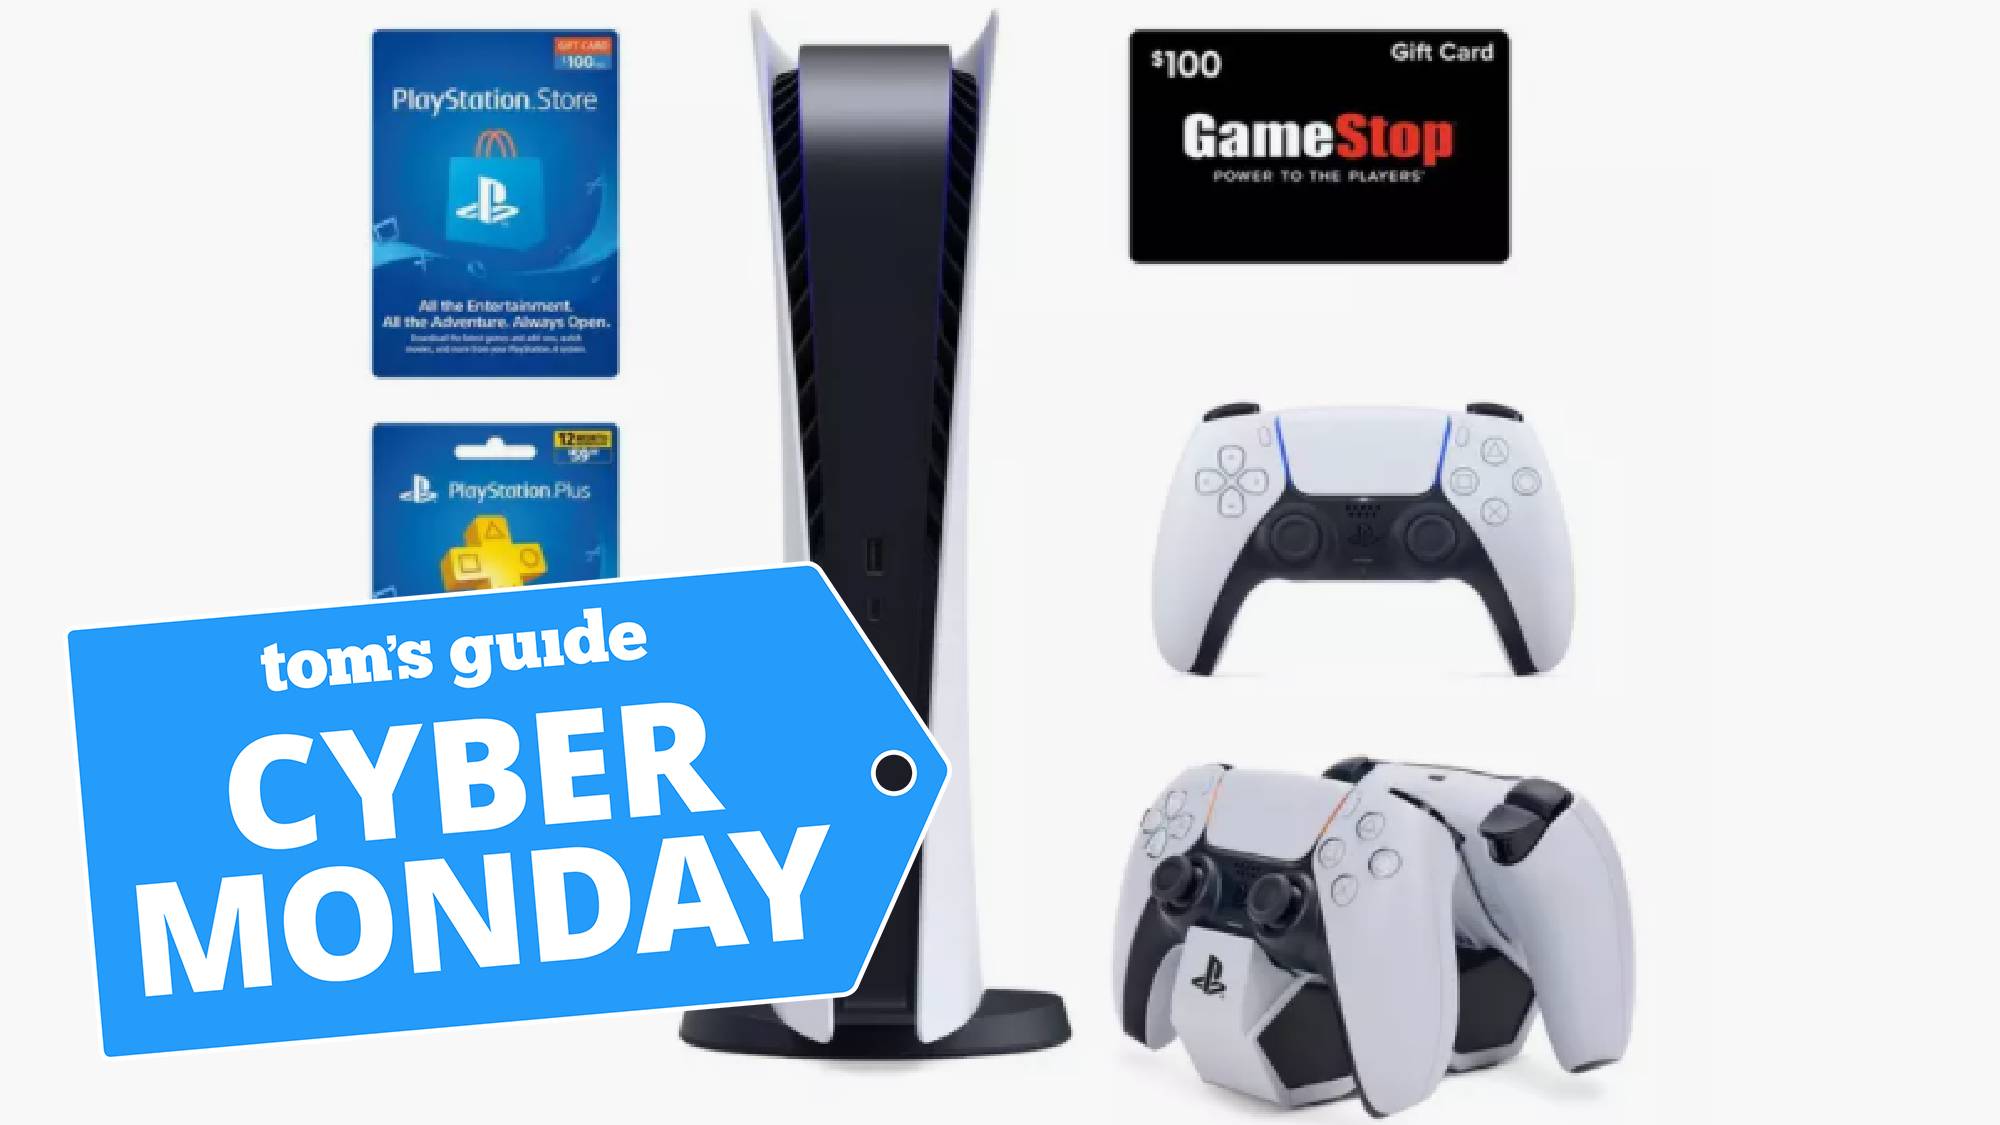 PS5 bundle at GameStop with a Cyber Monday deal tag